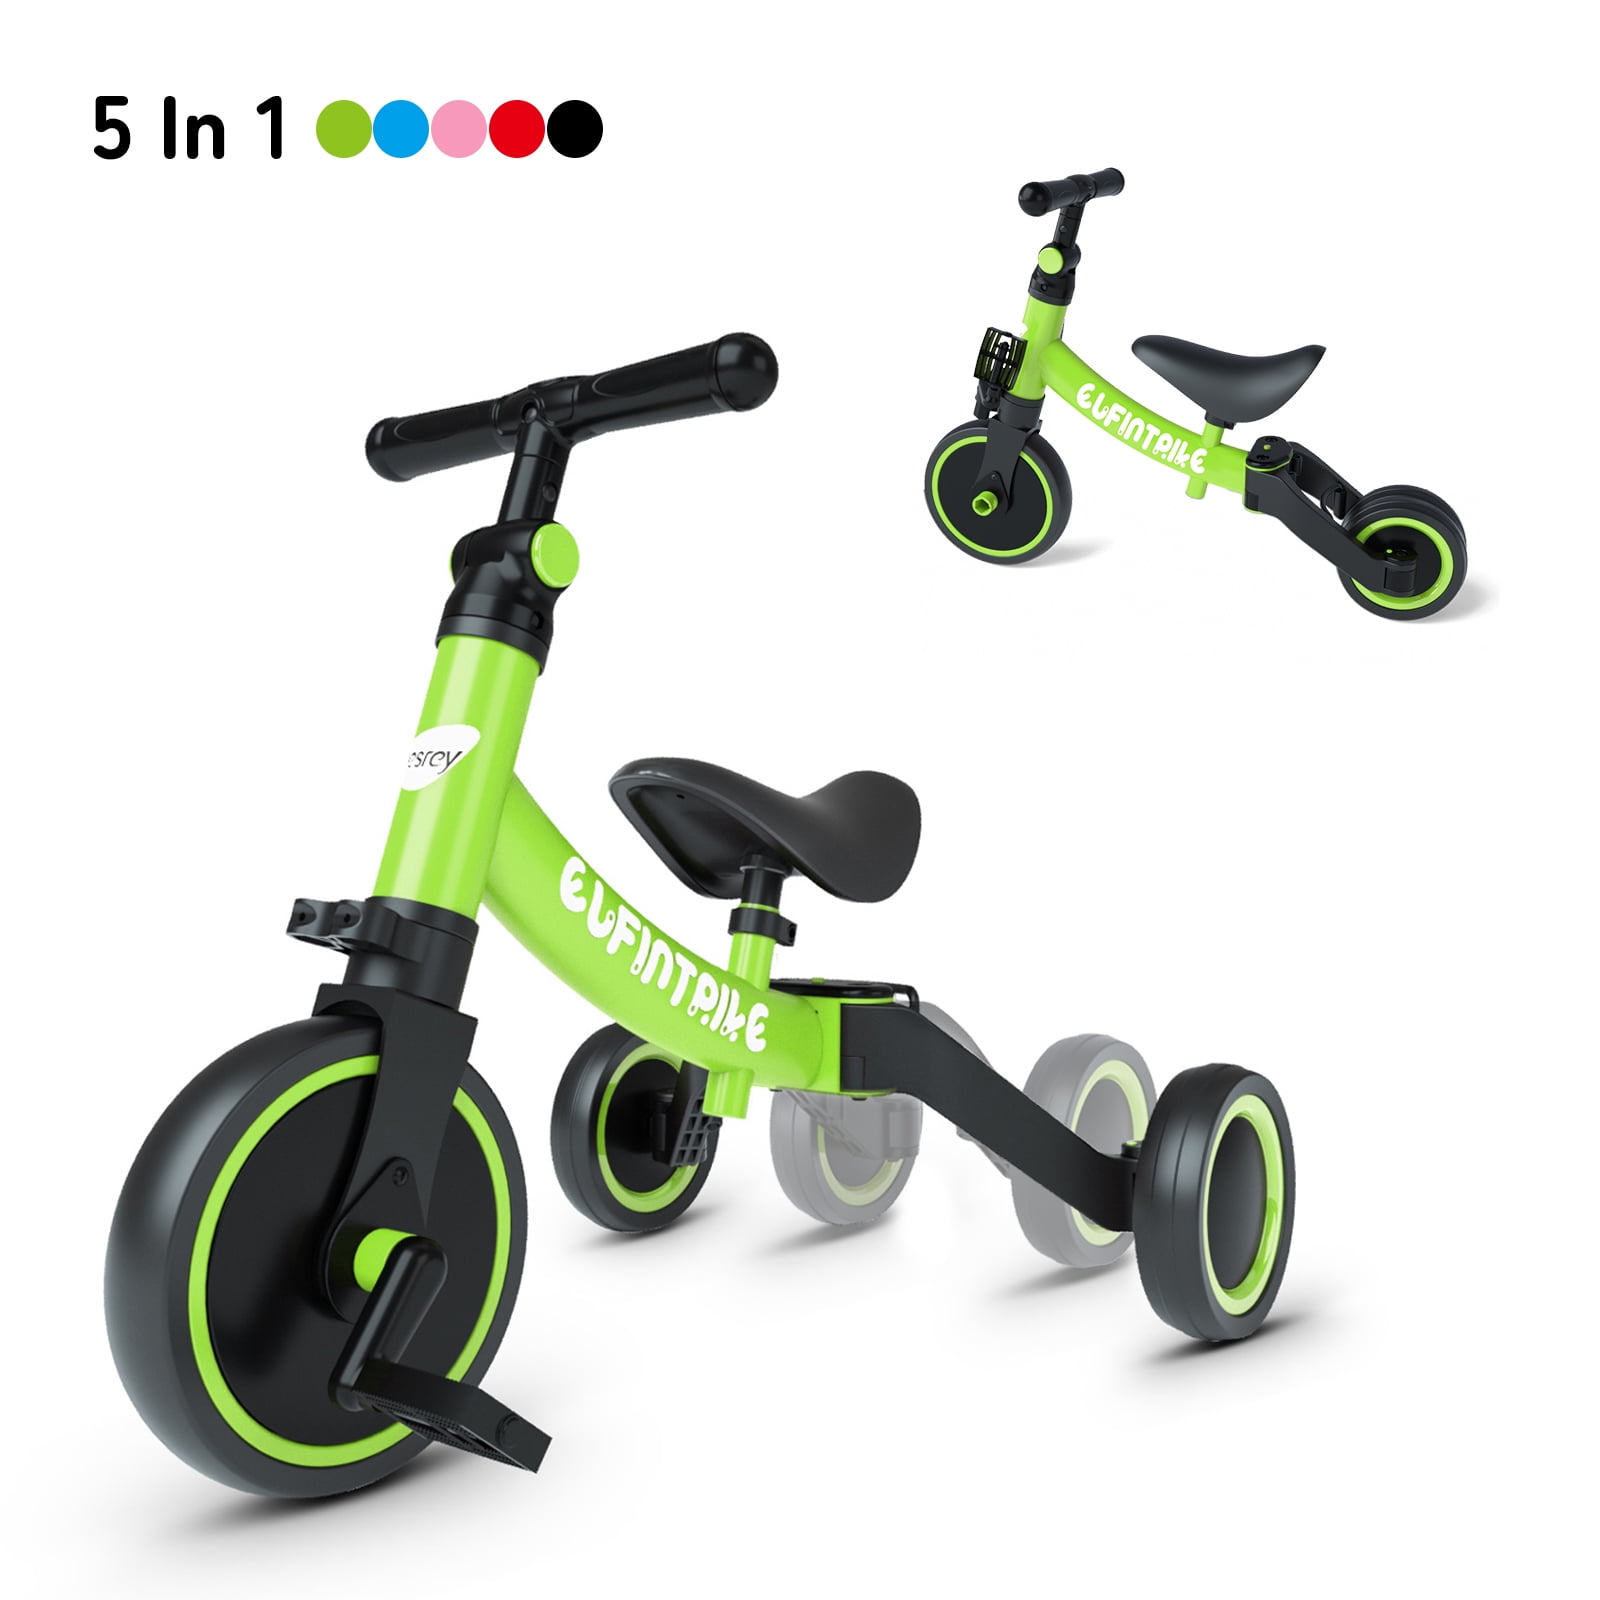 3in1 Trike Tricycle 1-3 Years Kid Toddler Balance Bike Adjustable Pedals Gift 